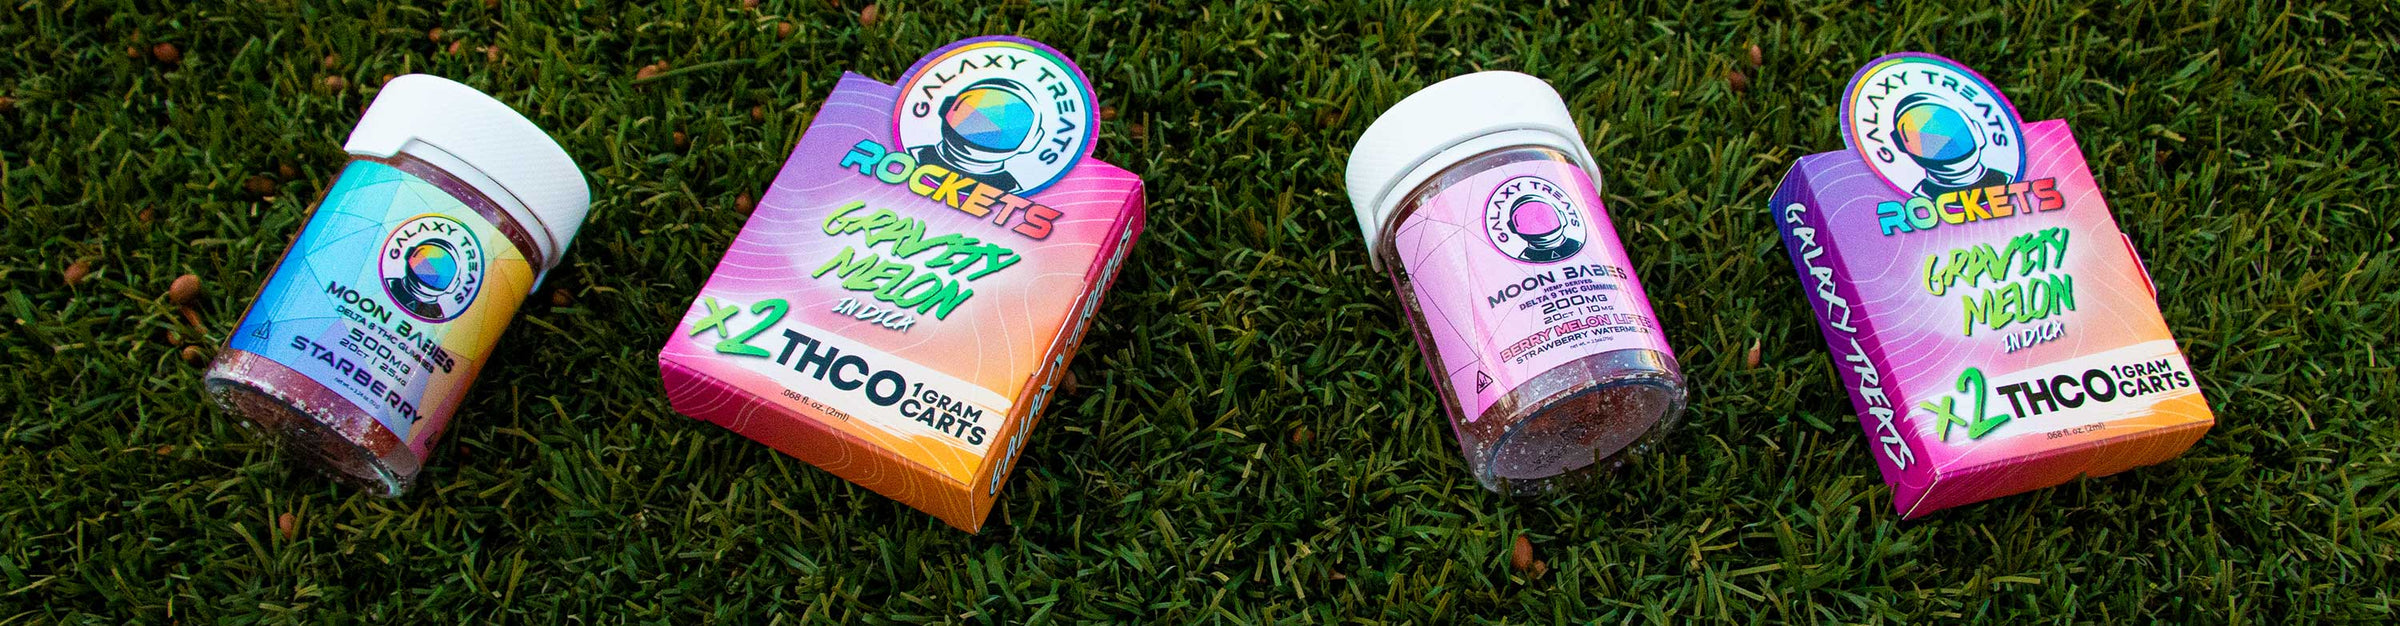 Galaxy Treats products laying down on grass outside near office building.